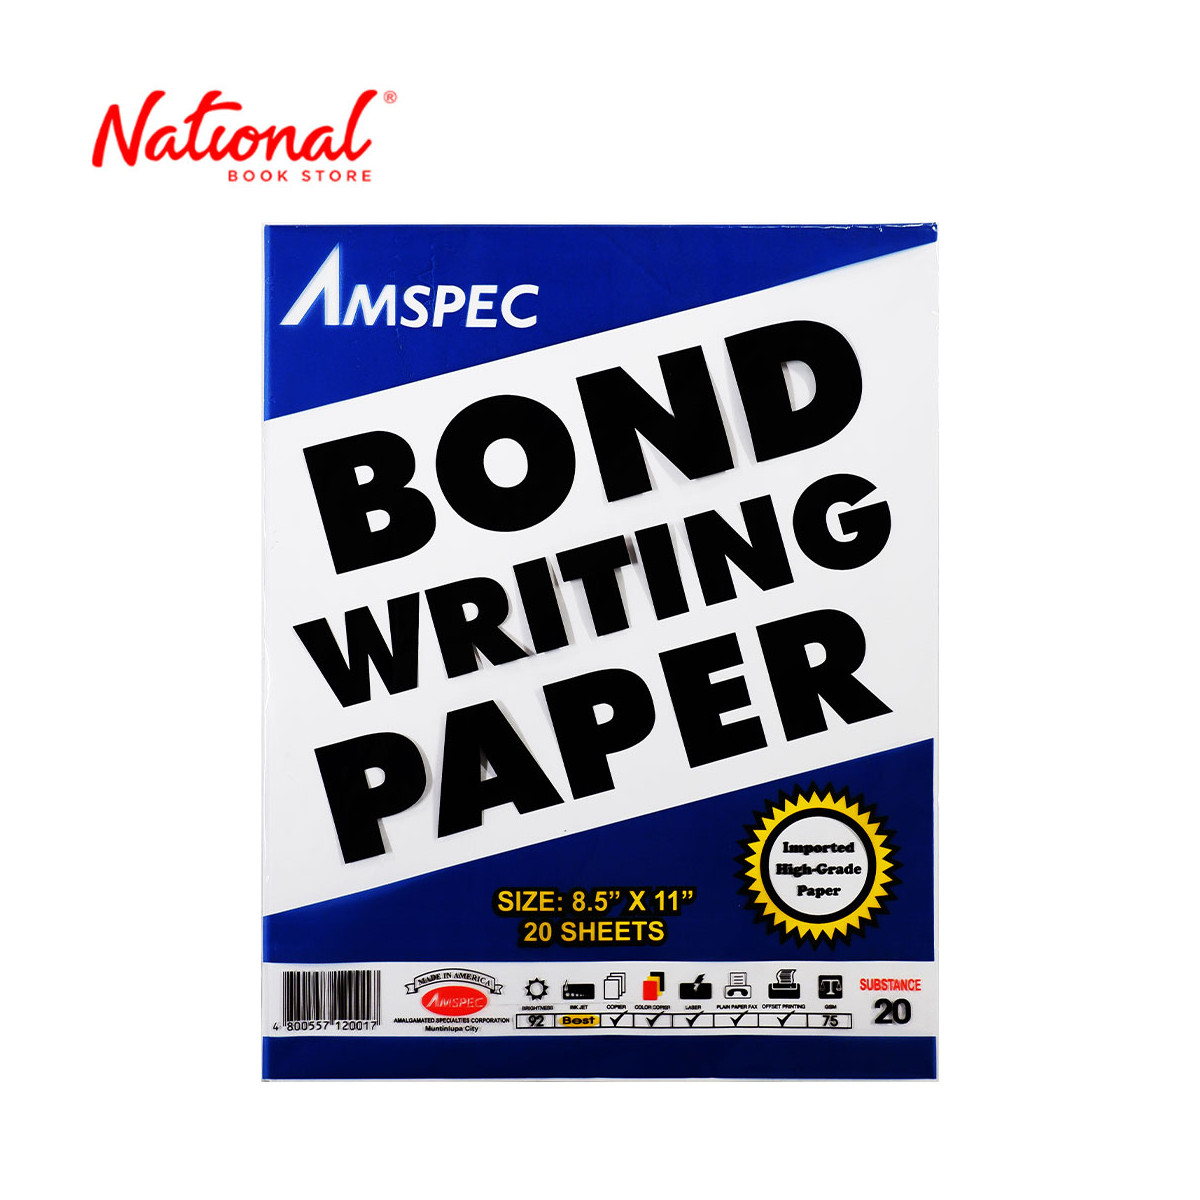 Amspec Typewriting Paper Short 70gsm 20's - School & Office Supplies - Copy Paper